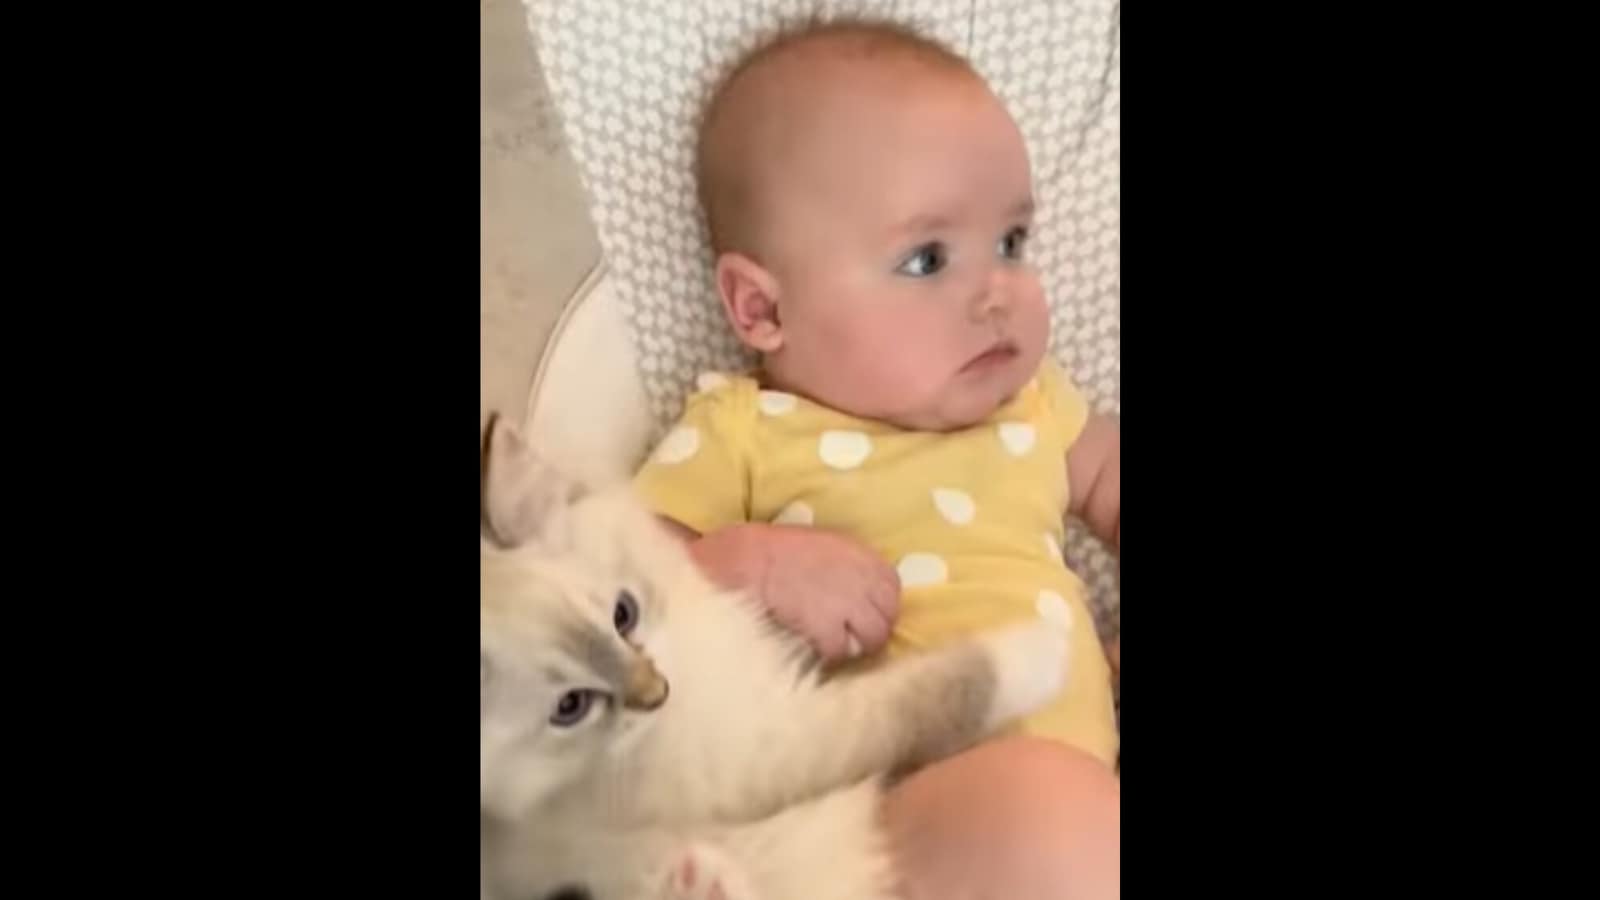 Viral video shows cute baby grow up alongside some adorable kittens. Watch